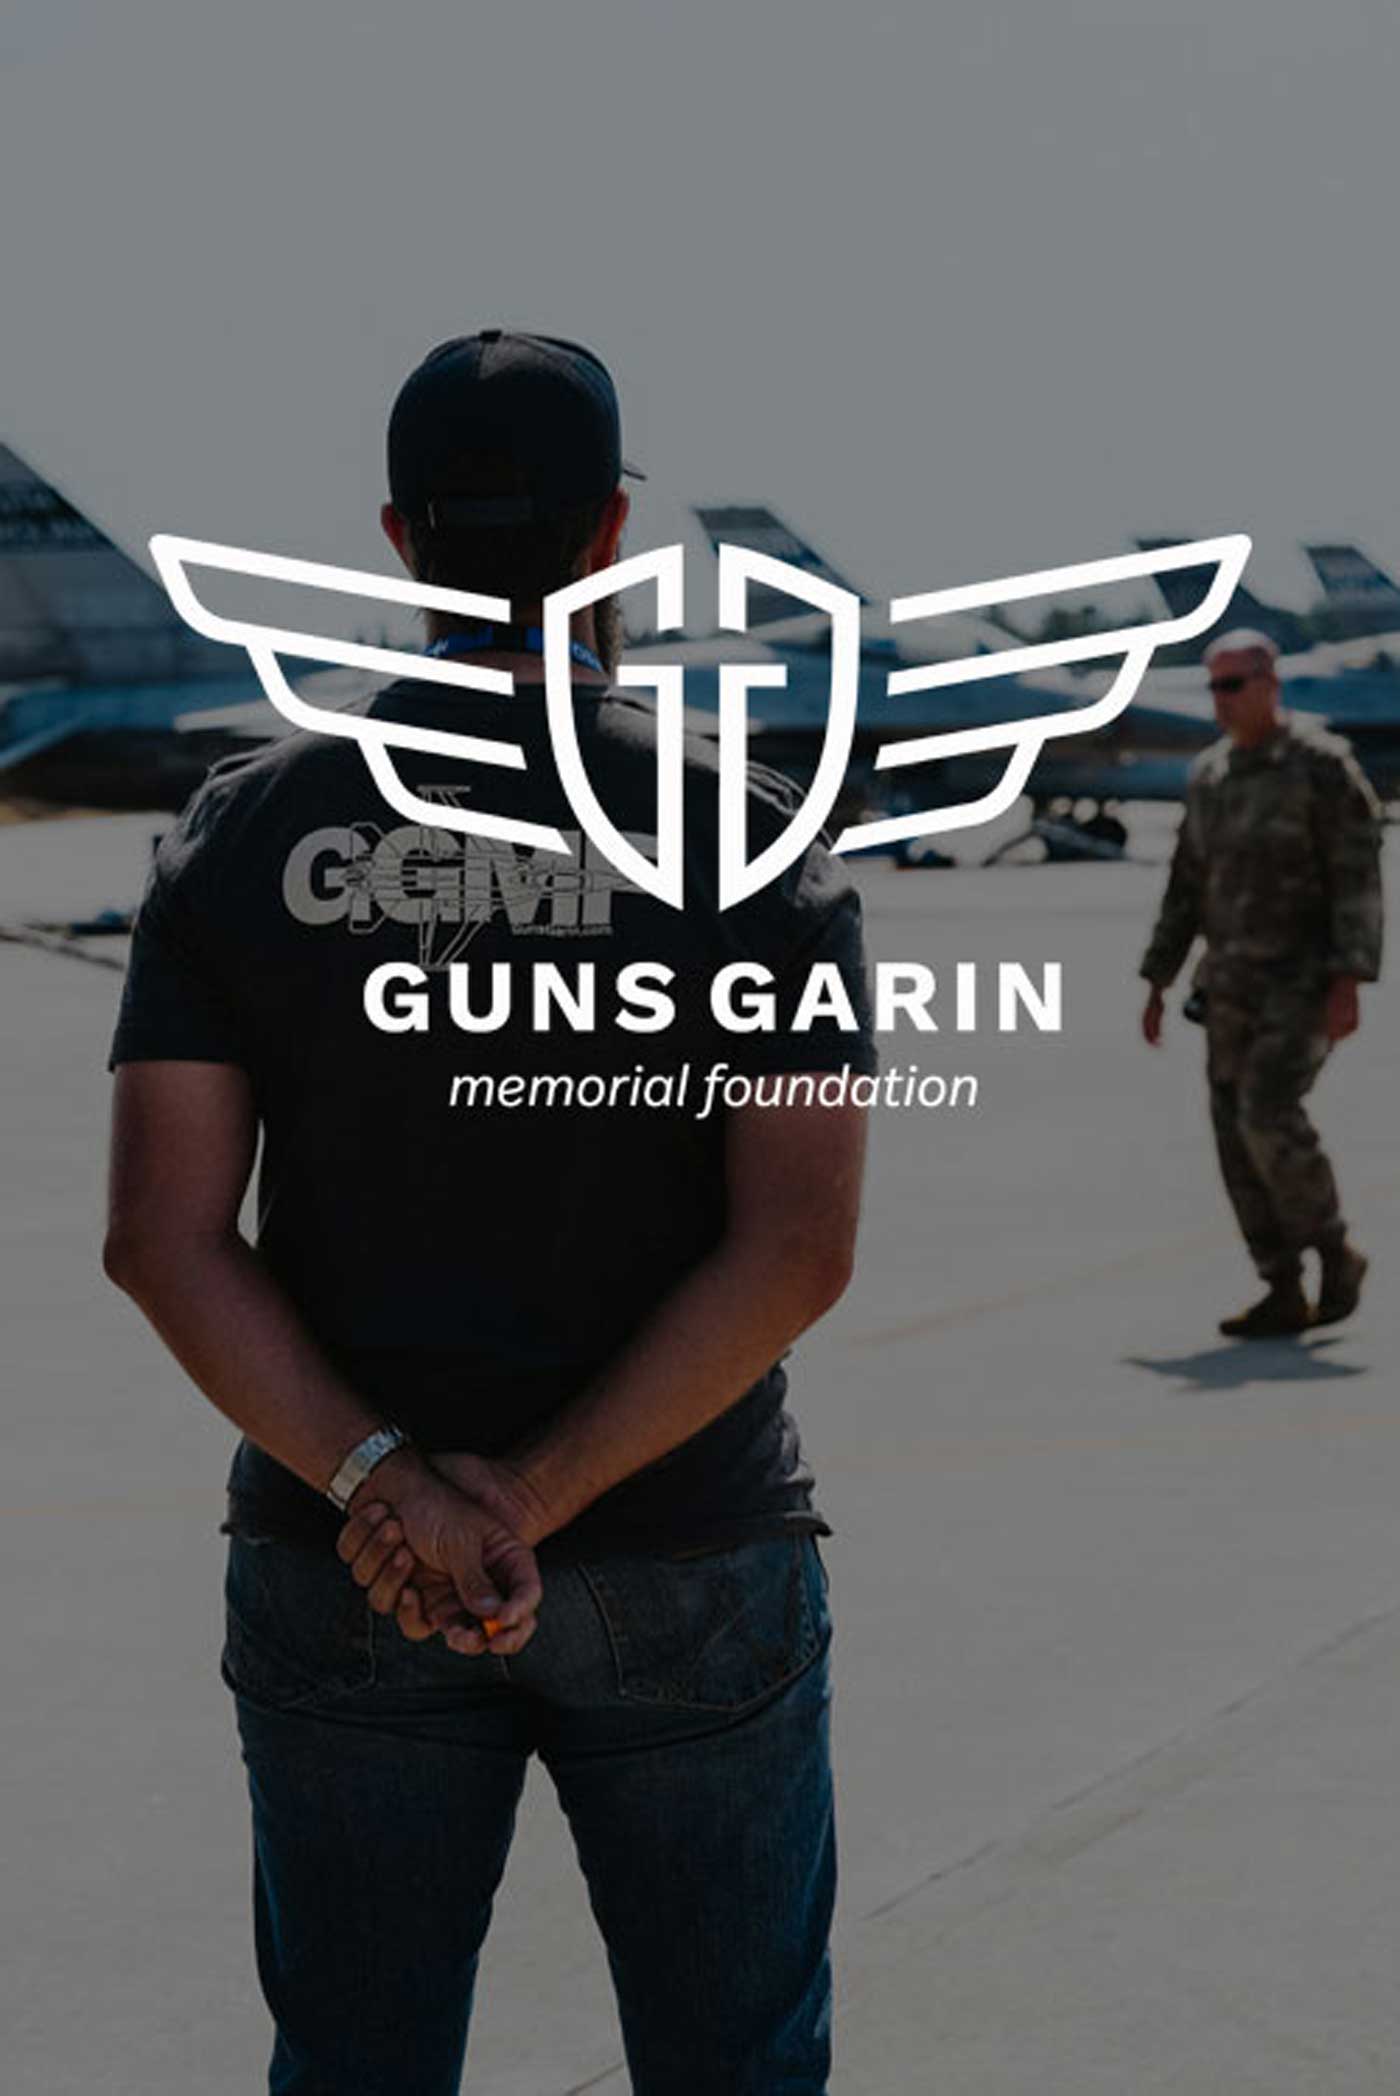 A man wearing a Guns Garin Memorial Foundation t-shirt stands with his hands clasped behind his back as he looks towards jets. The Guns Garin Memorial Foundation is overlayed on top of the image.